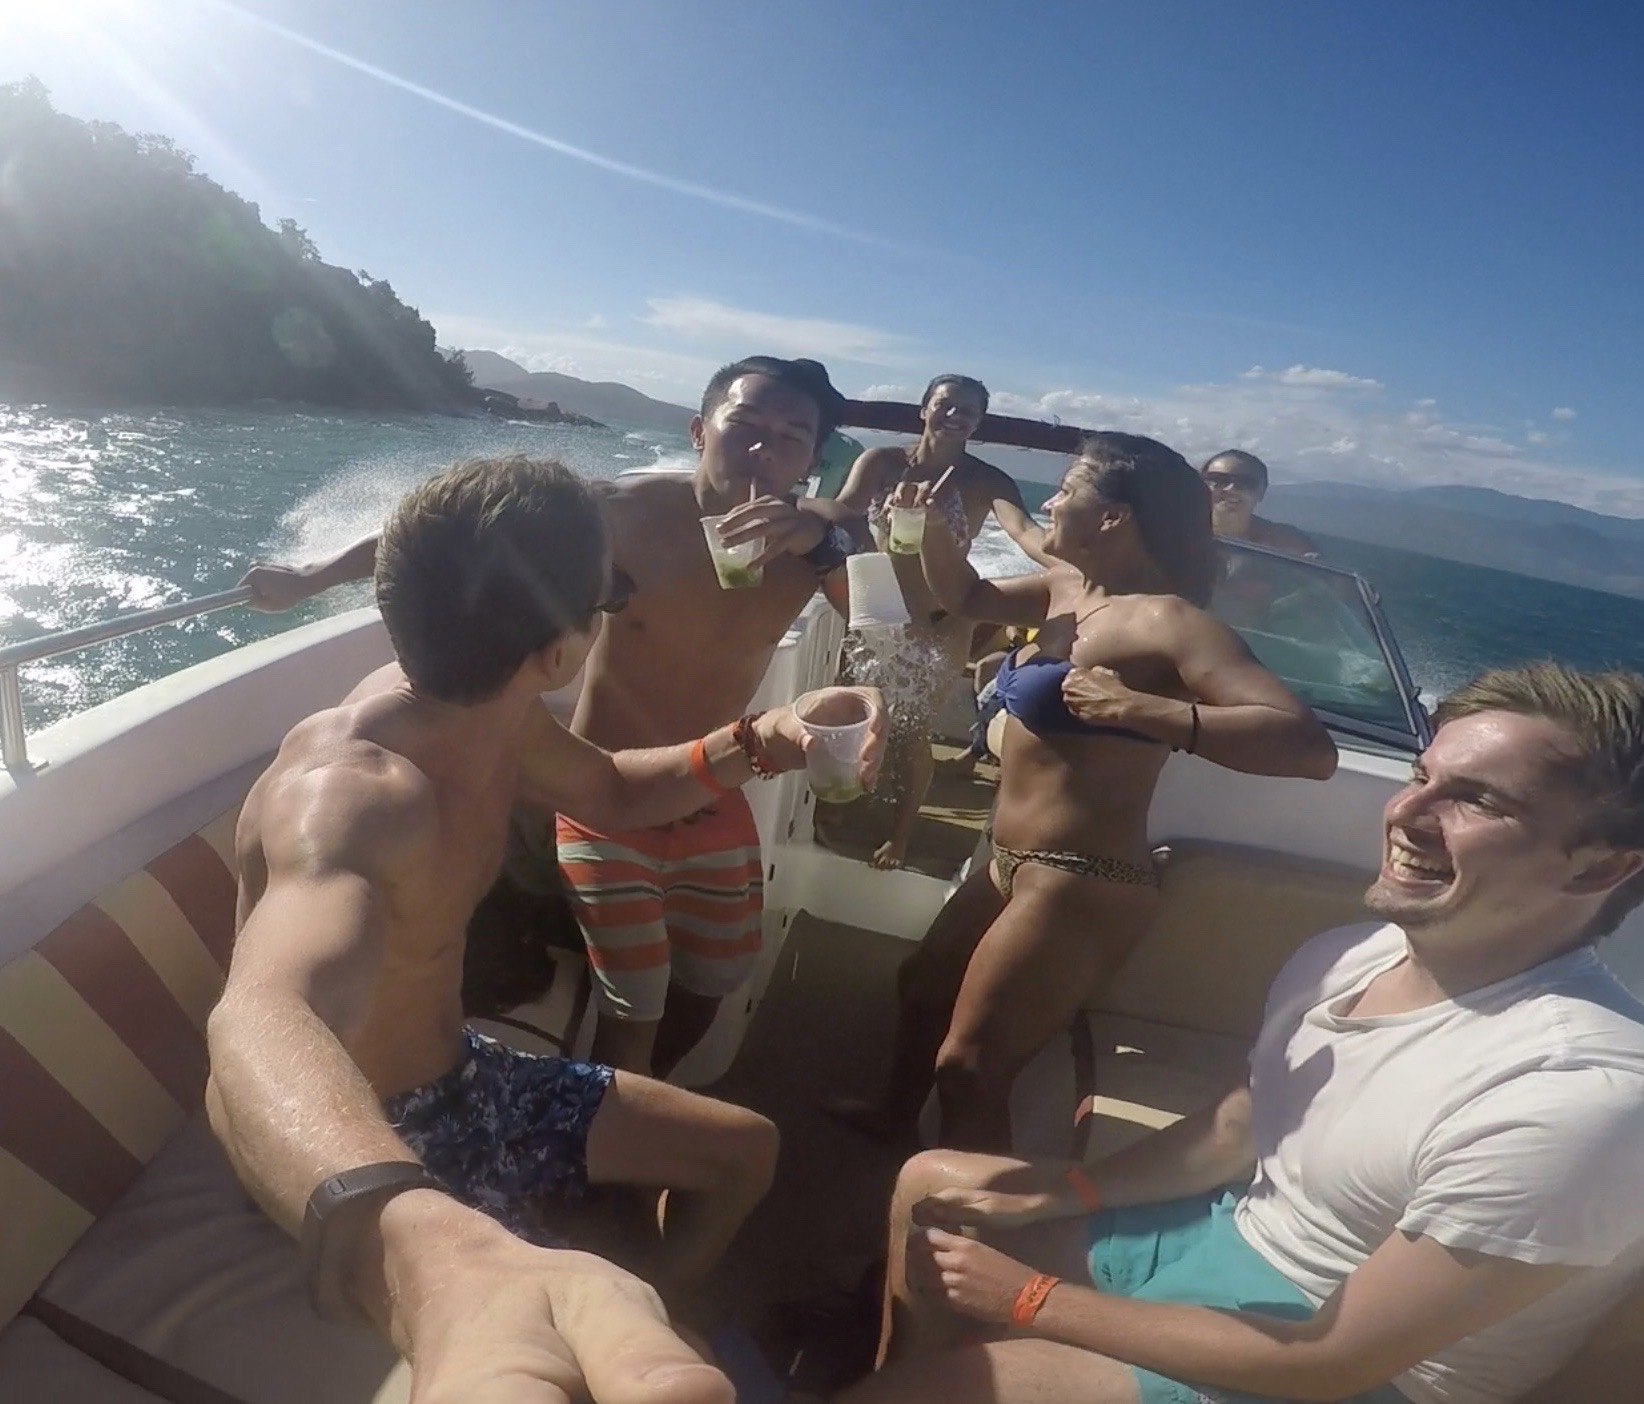 David Simpson and friends at speedboat tour in Ilha Grande, Brazil. Ilha Grande cures the hangover from hell